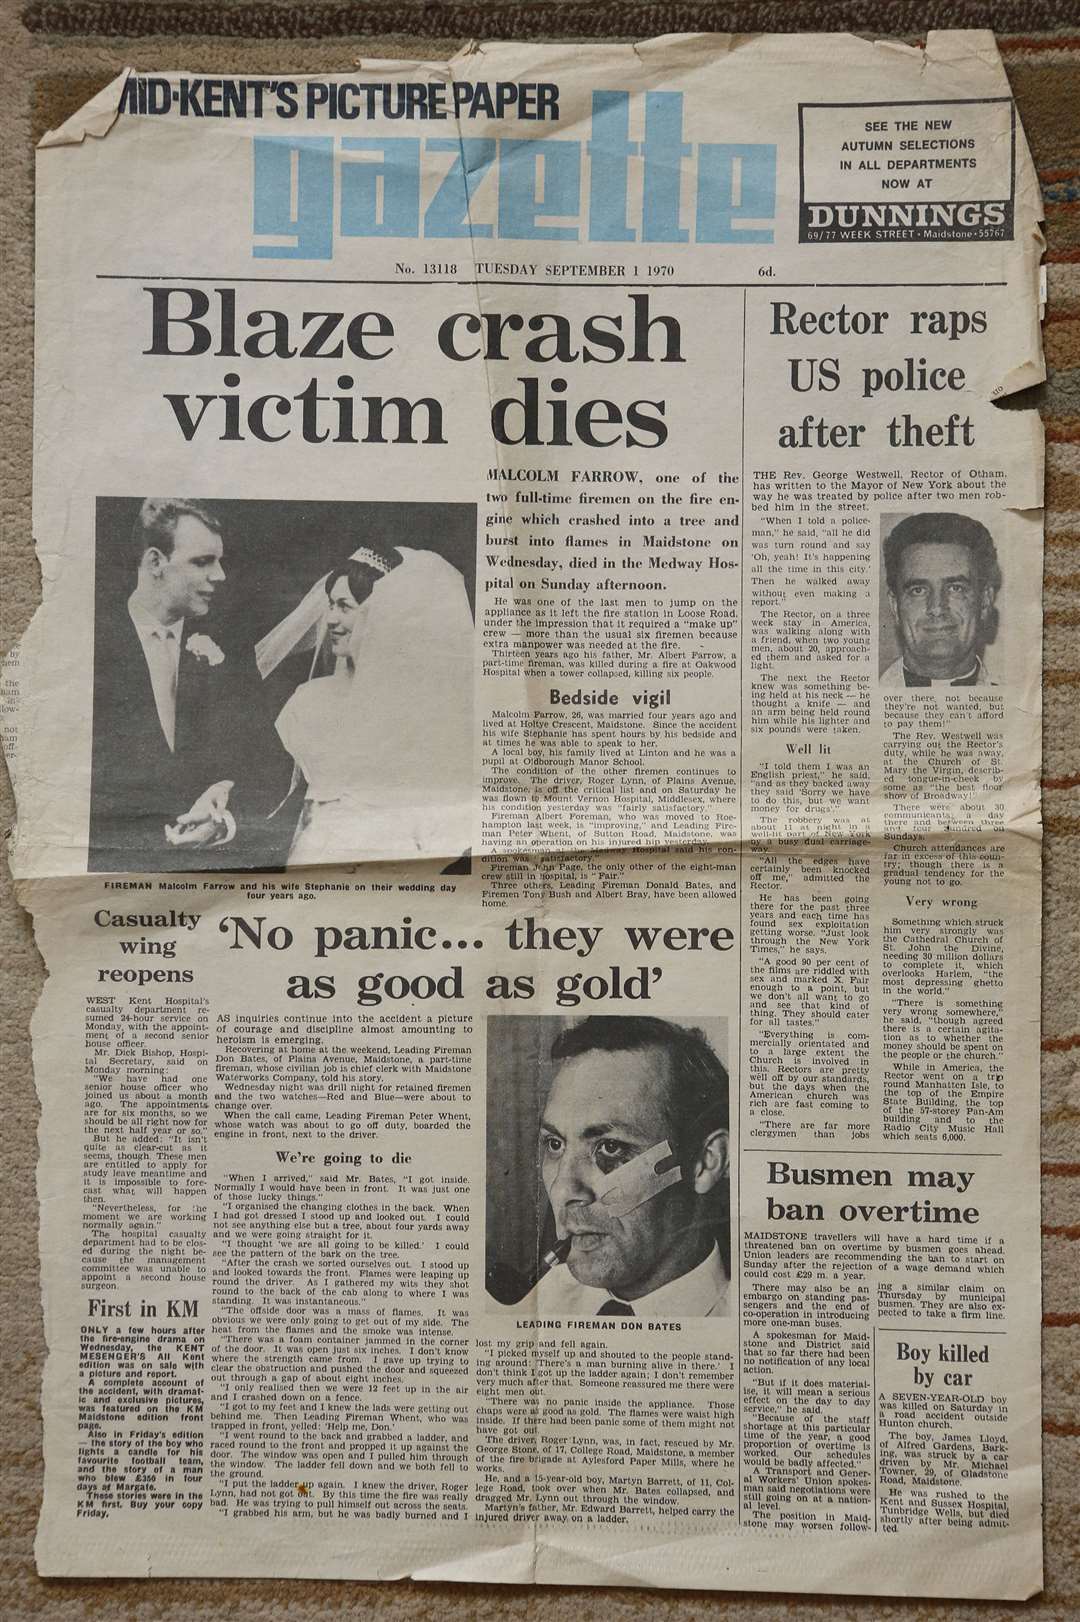 The tragedy was also the front page story on our sister paper of the time, The Gazette